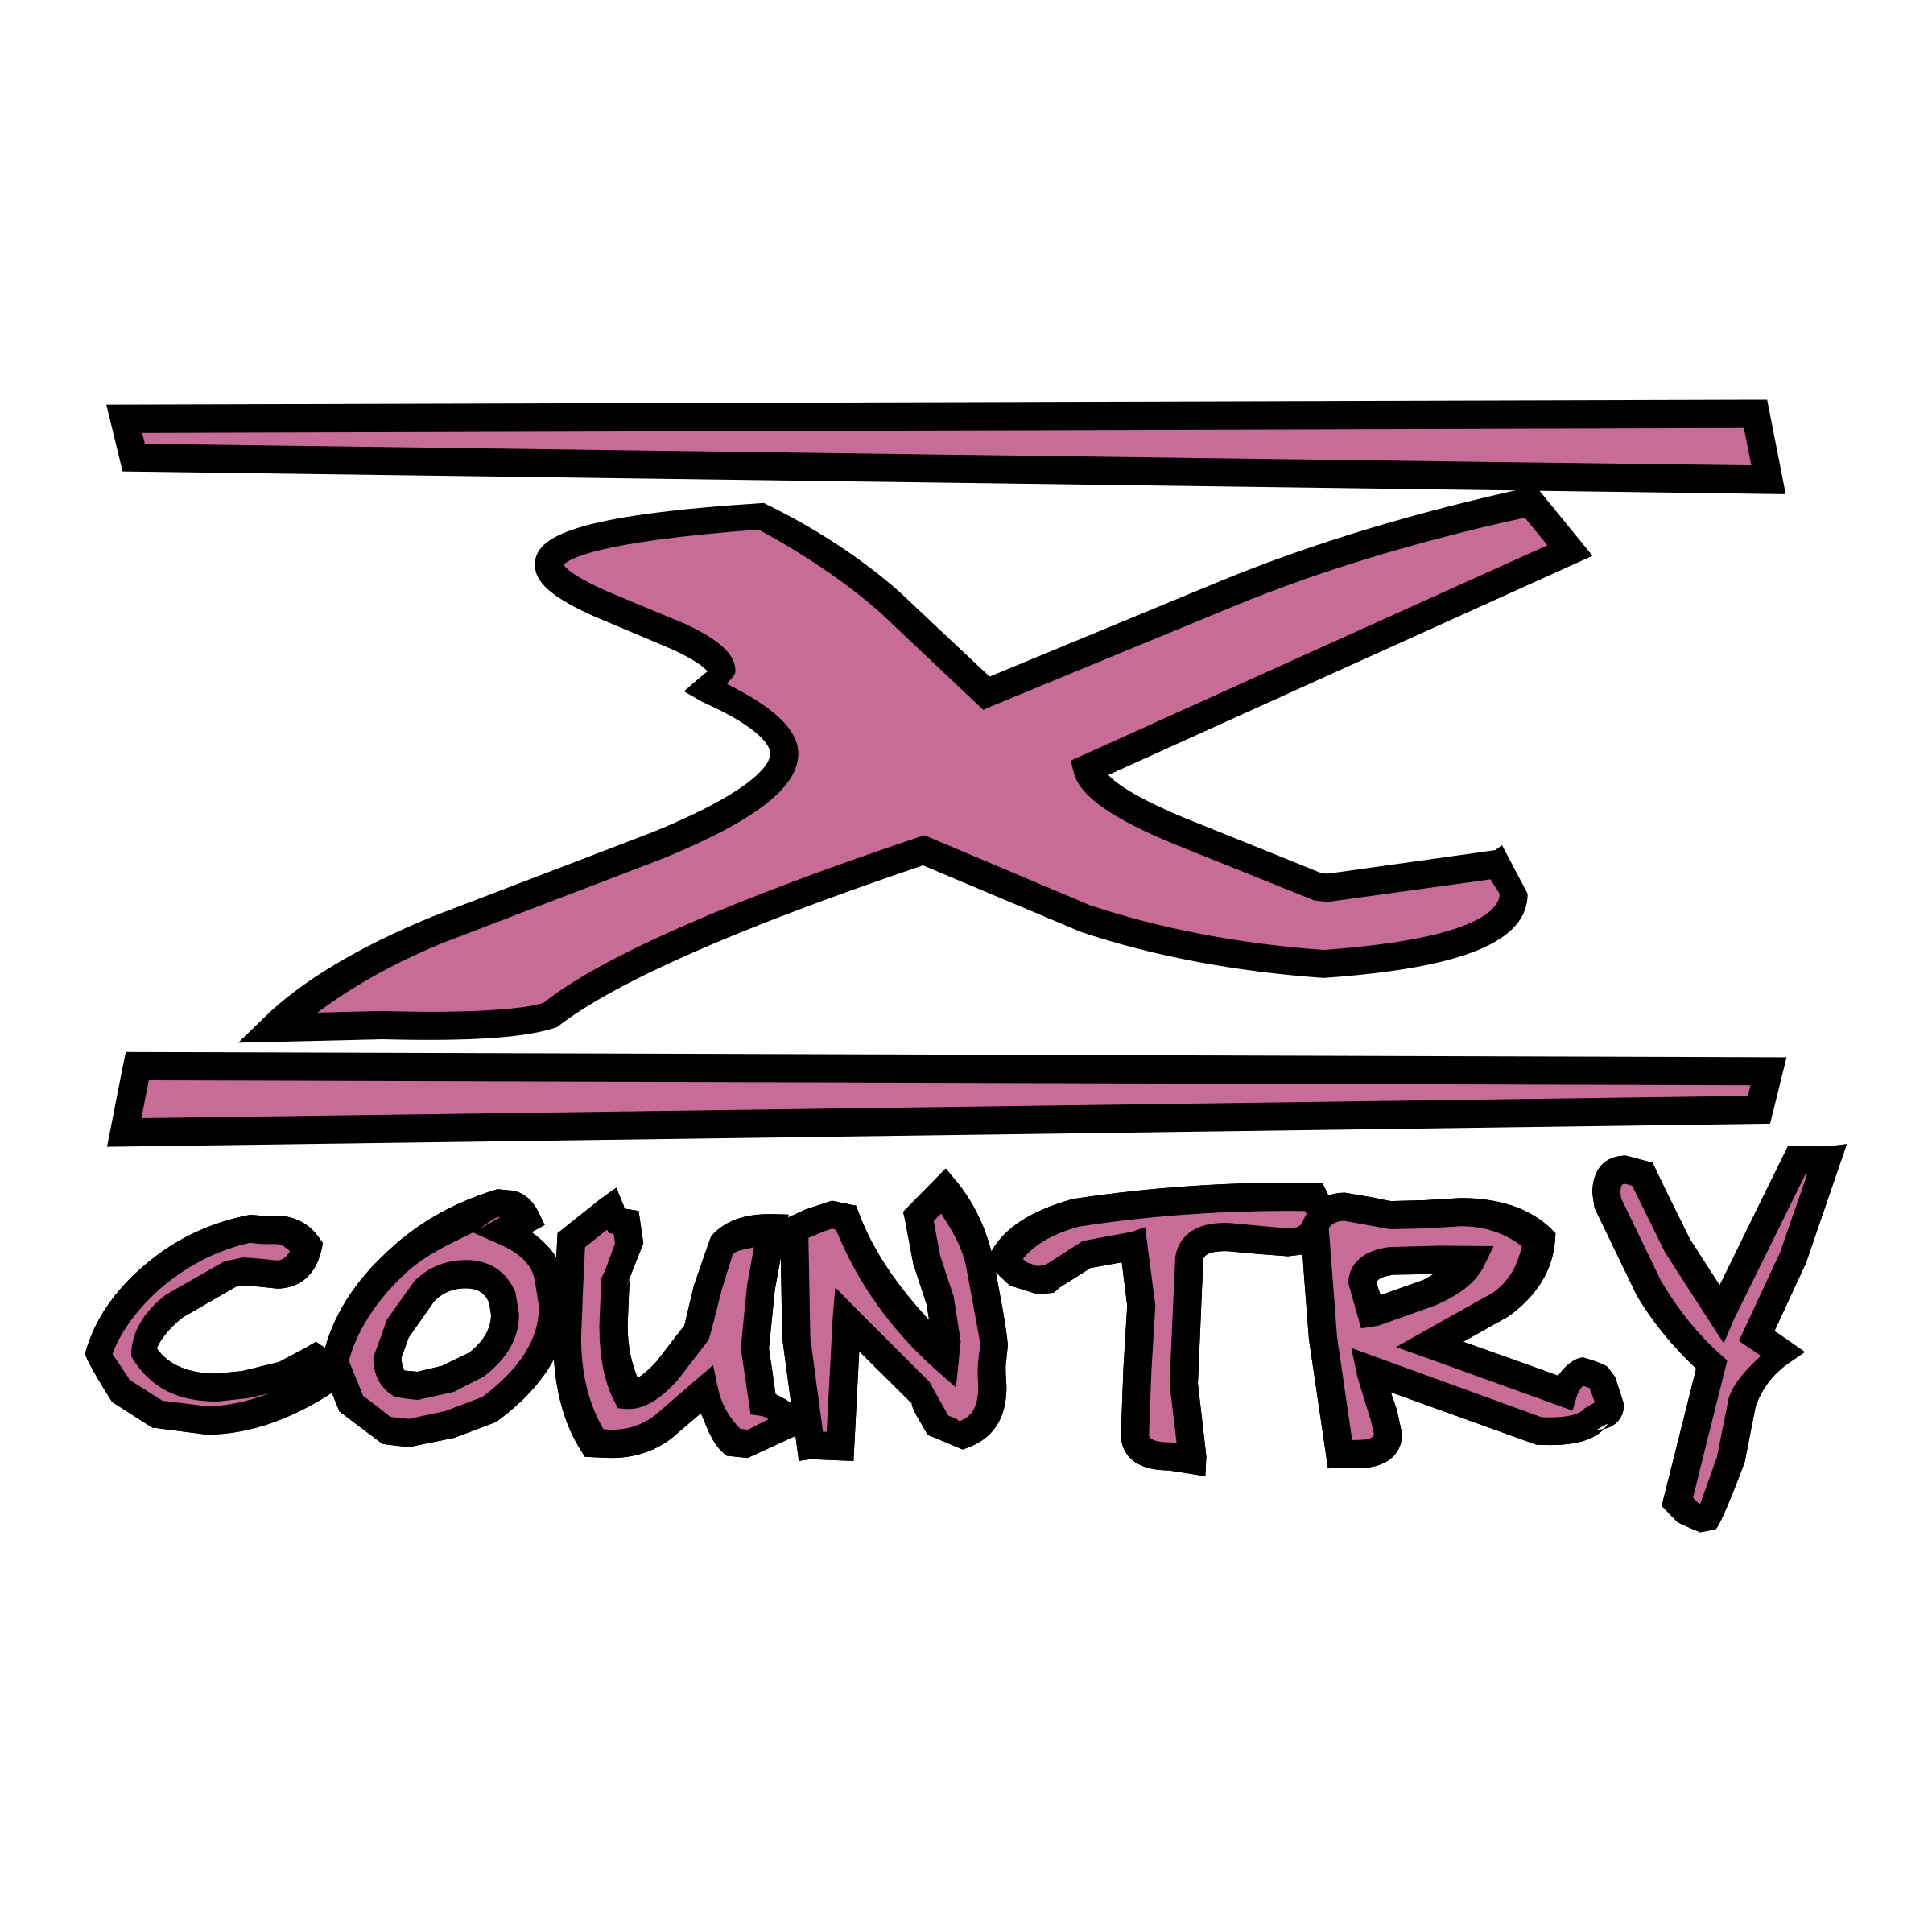 X-Country Logo - X Country Logo PNG Transparent & SVG Vector - Freebie Supply